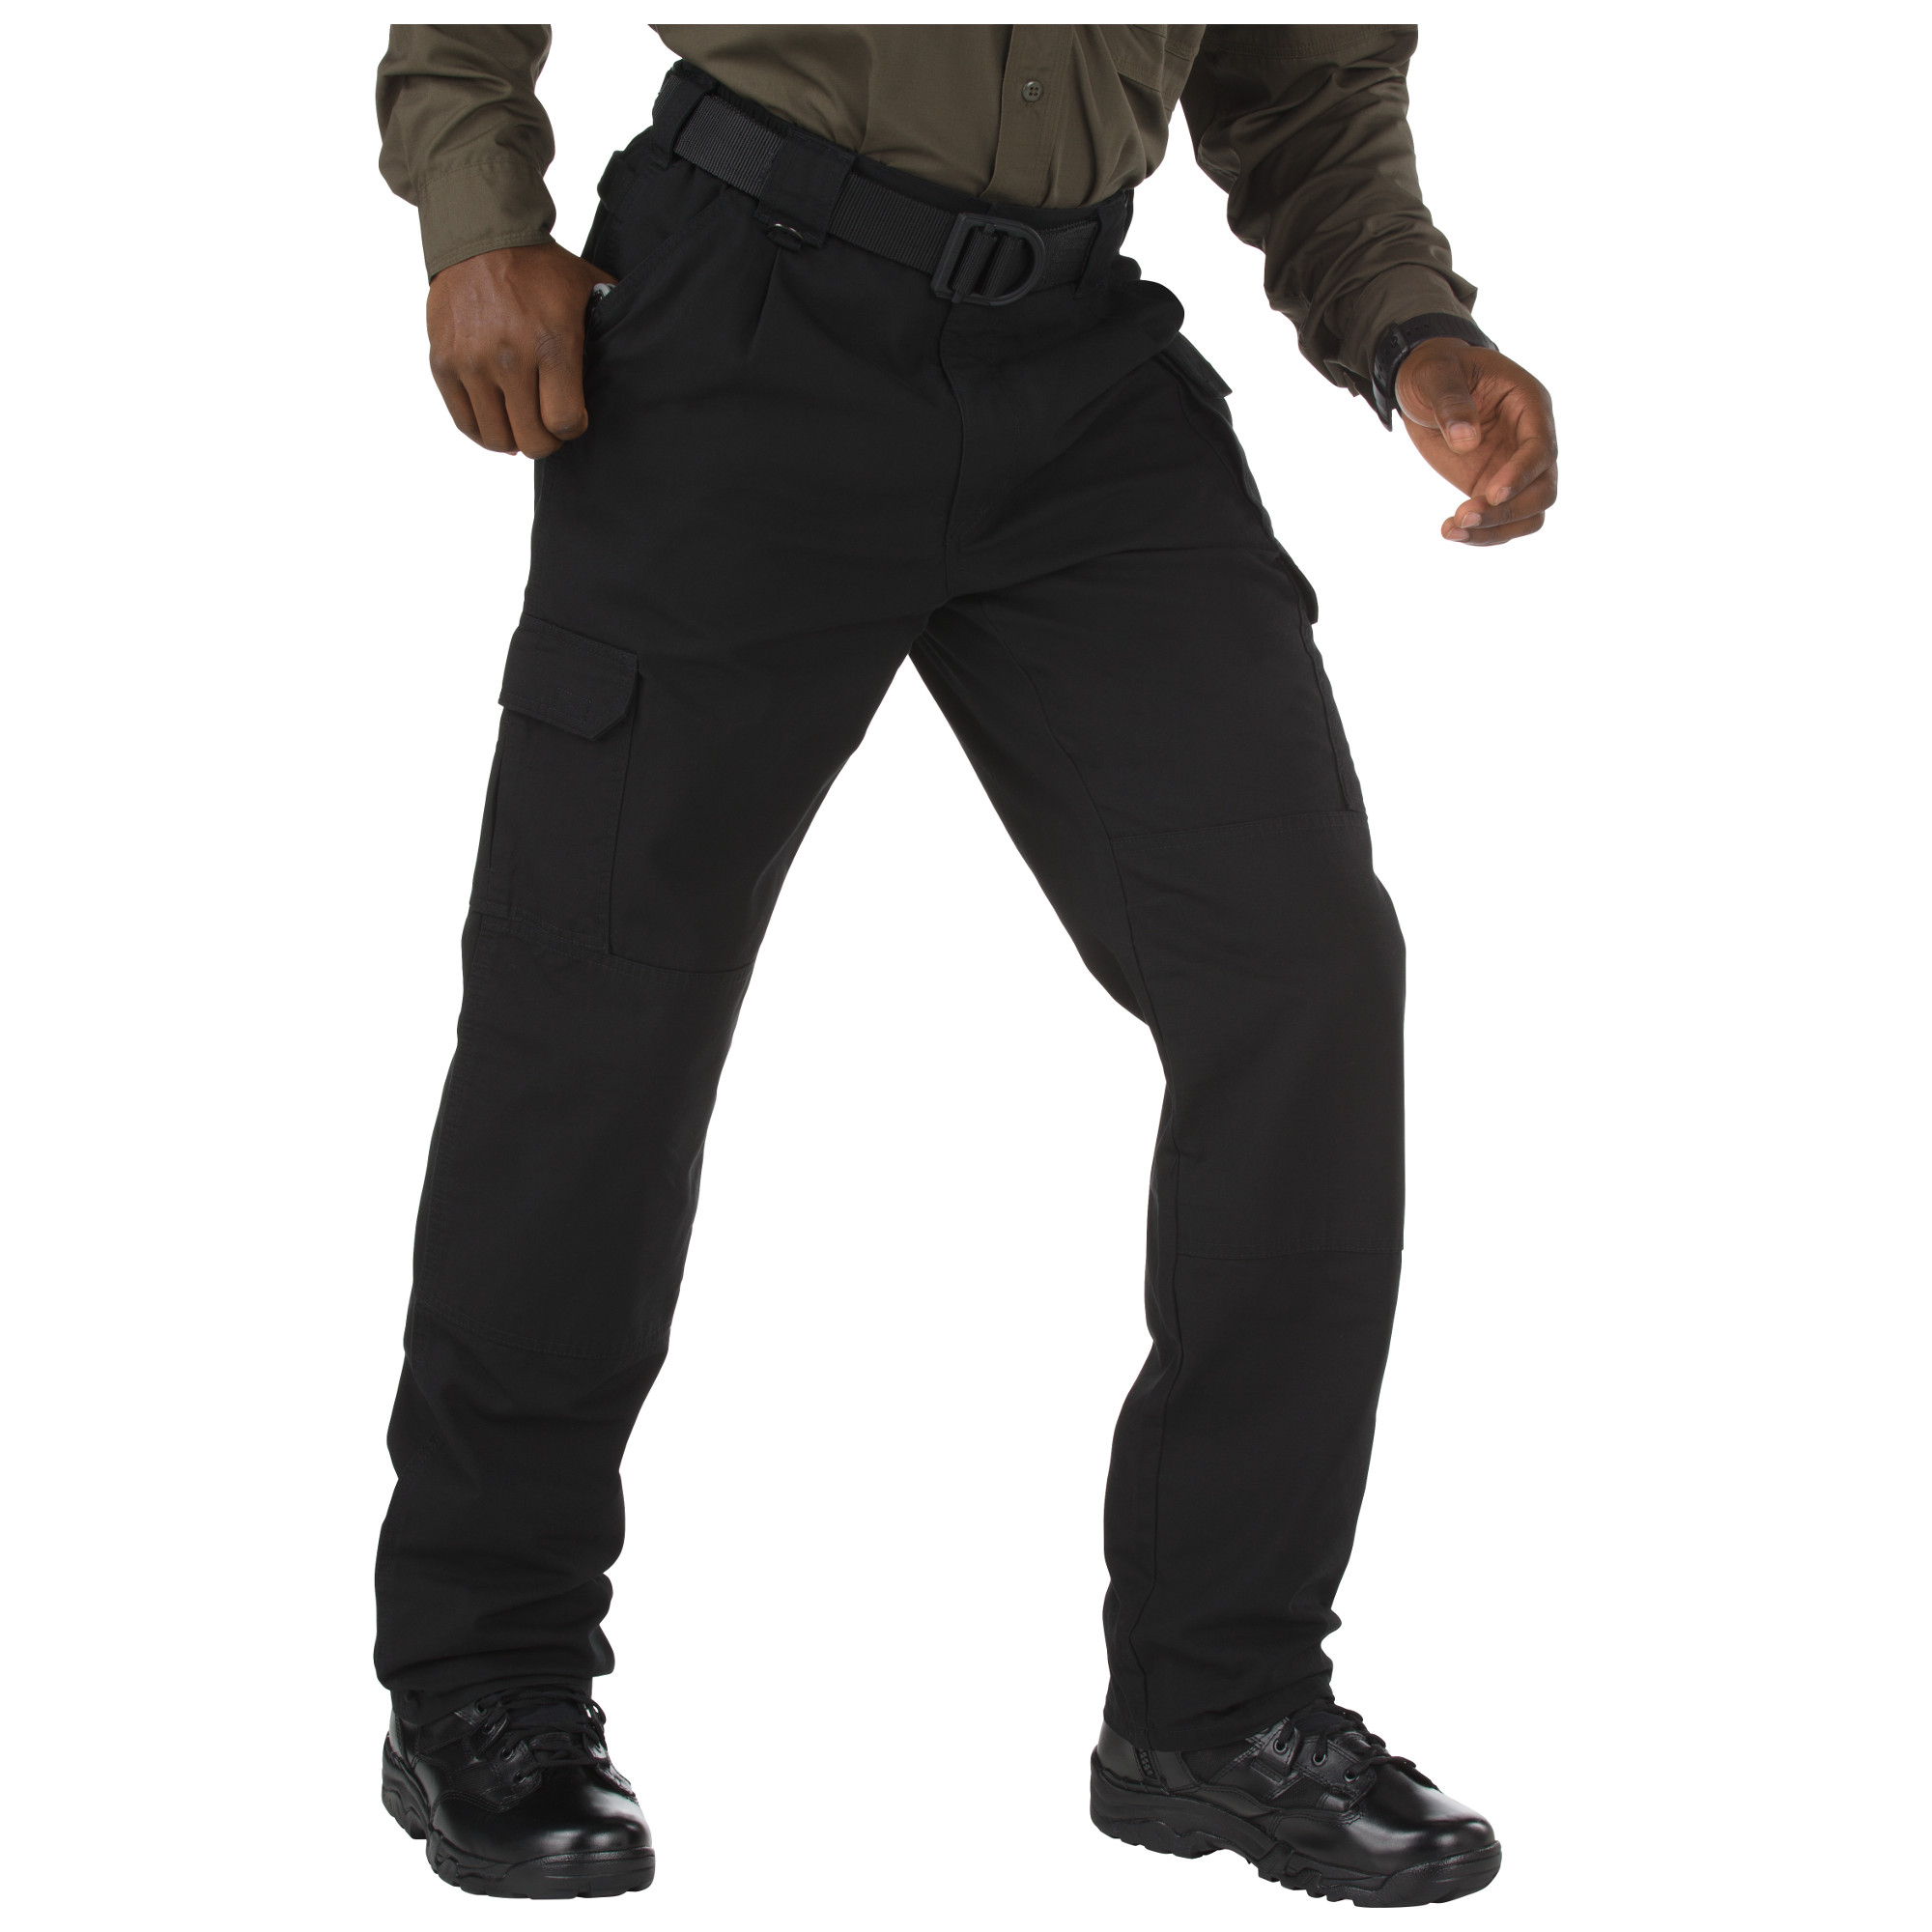 Tactical Combat Trousers Product Review - YouTube